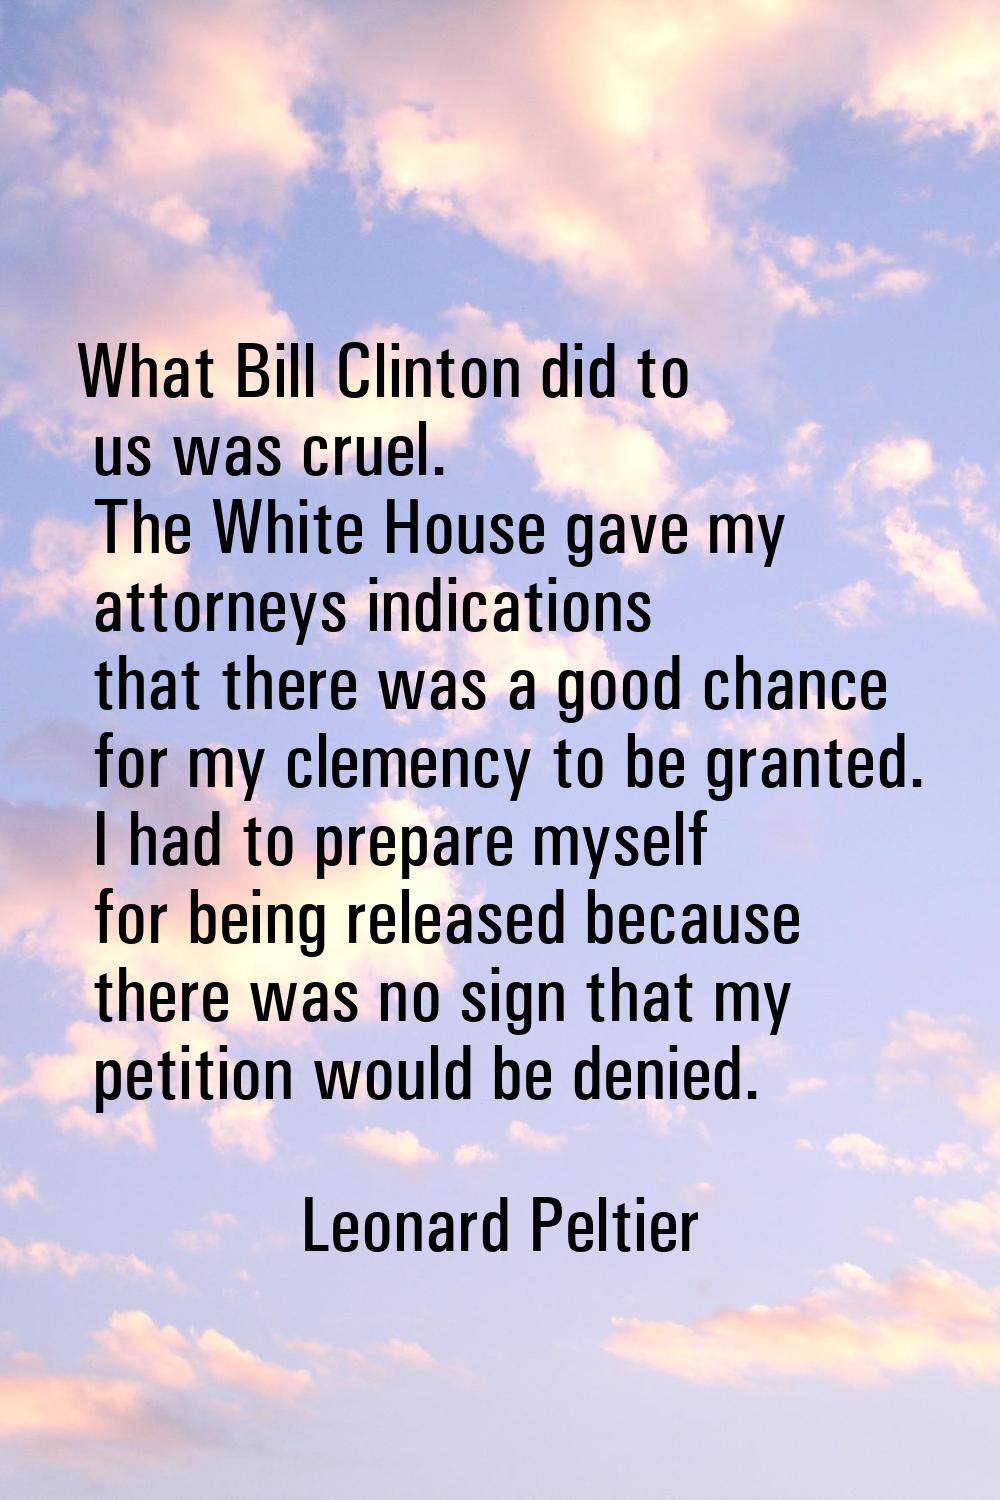 What Bill Clinton did to us was cruel. The White House gave my attorneys indications that there was